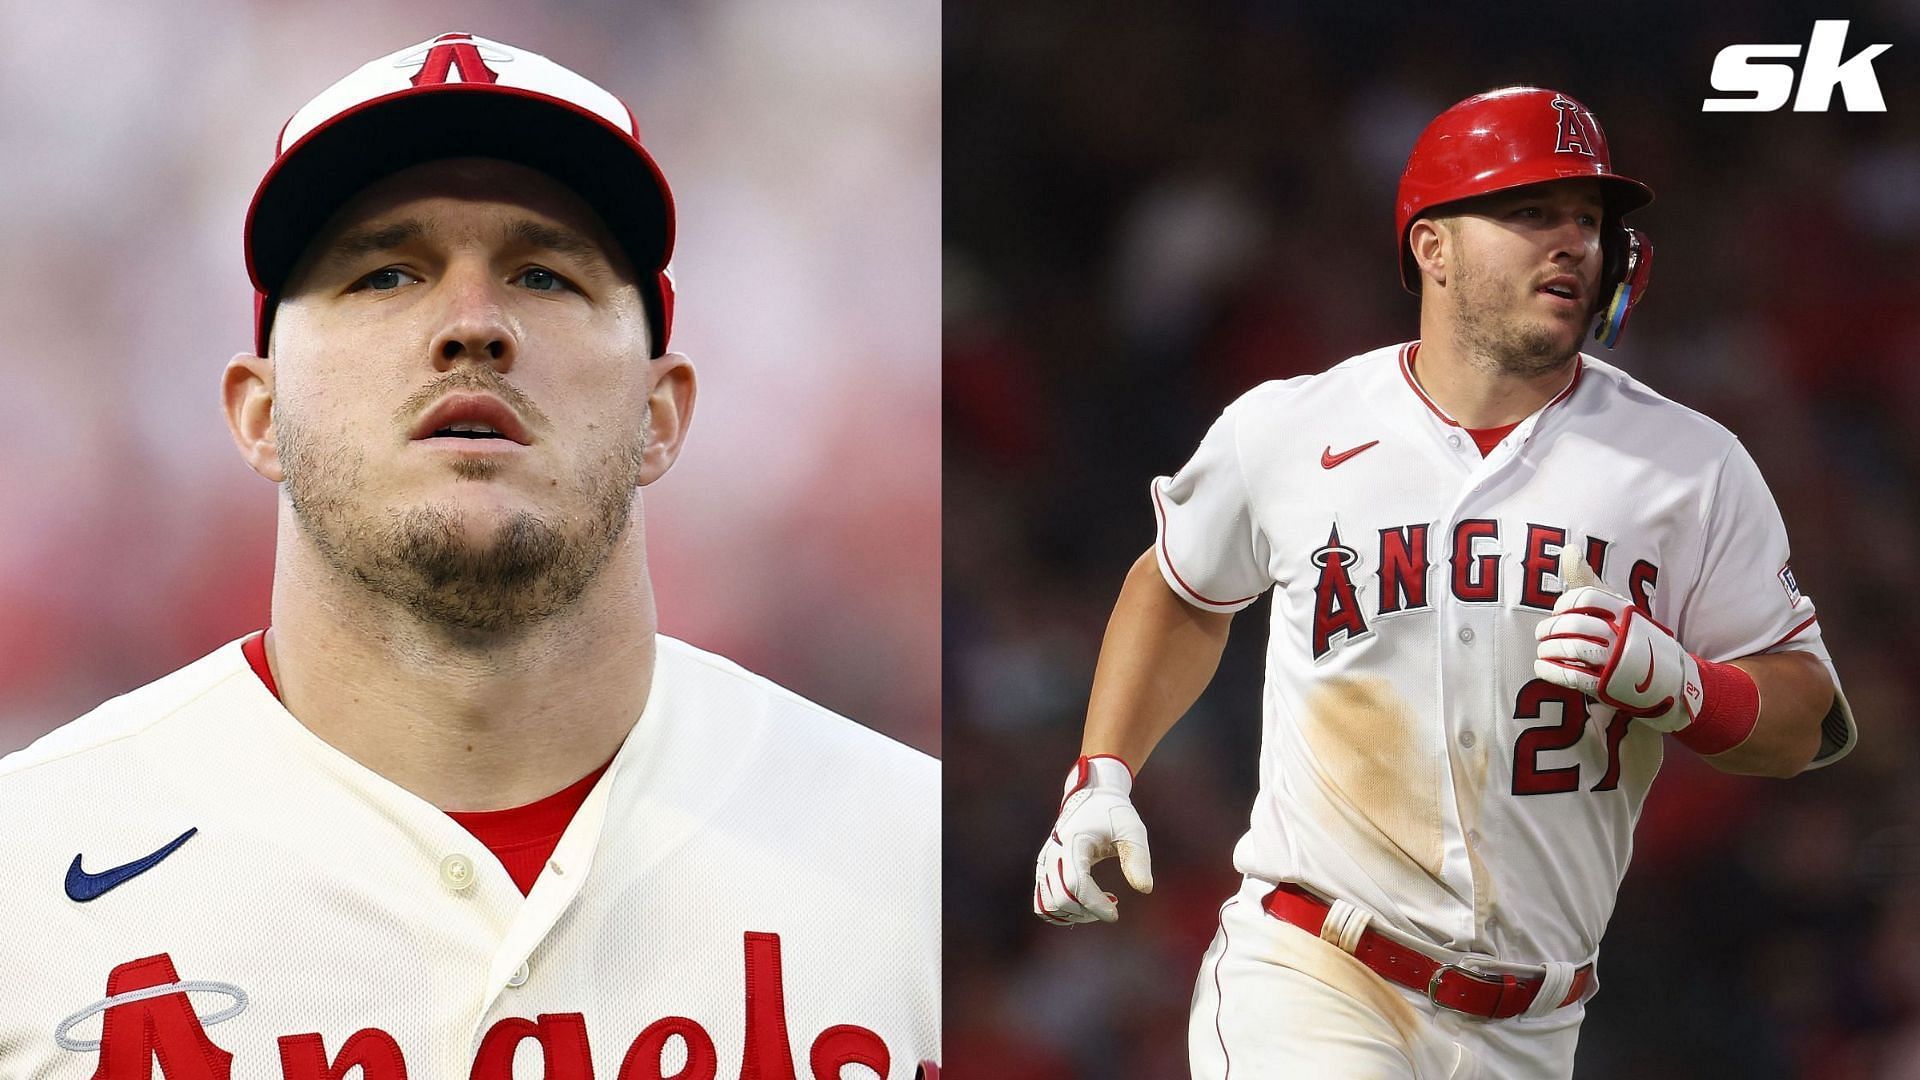 Mike Trout says the Angels postseason drought motivates him to give it his all every day he steps on the field